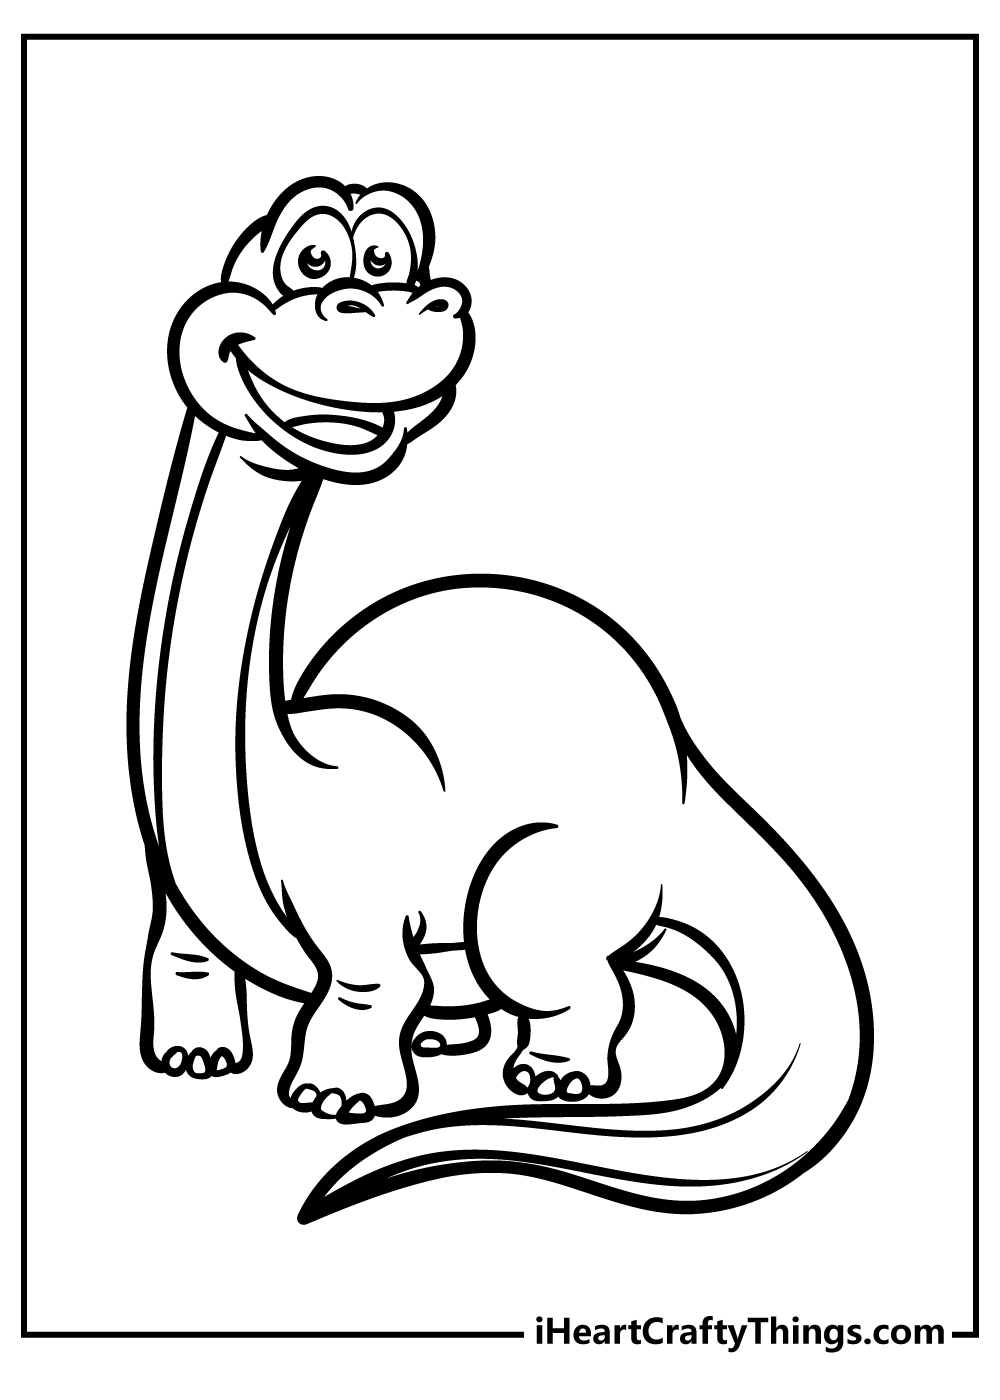 Baby Dinosaur Coloring Pages for preschoolers free printable